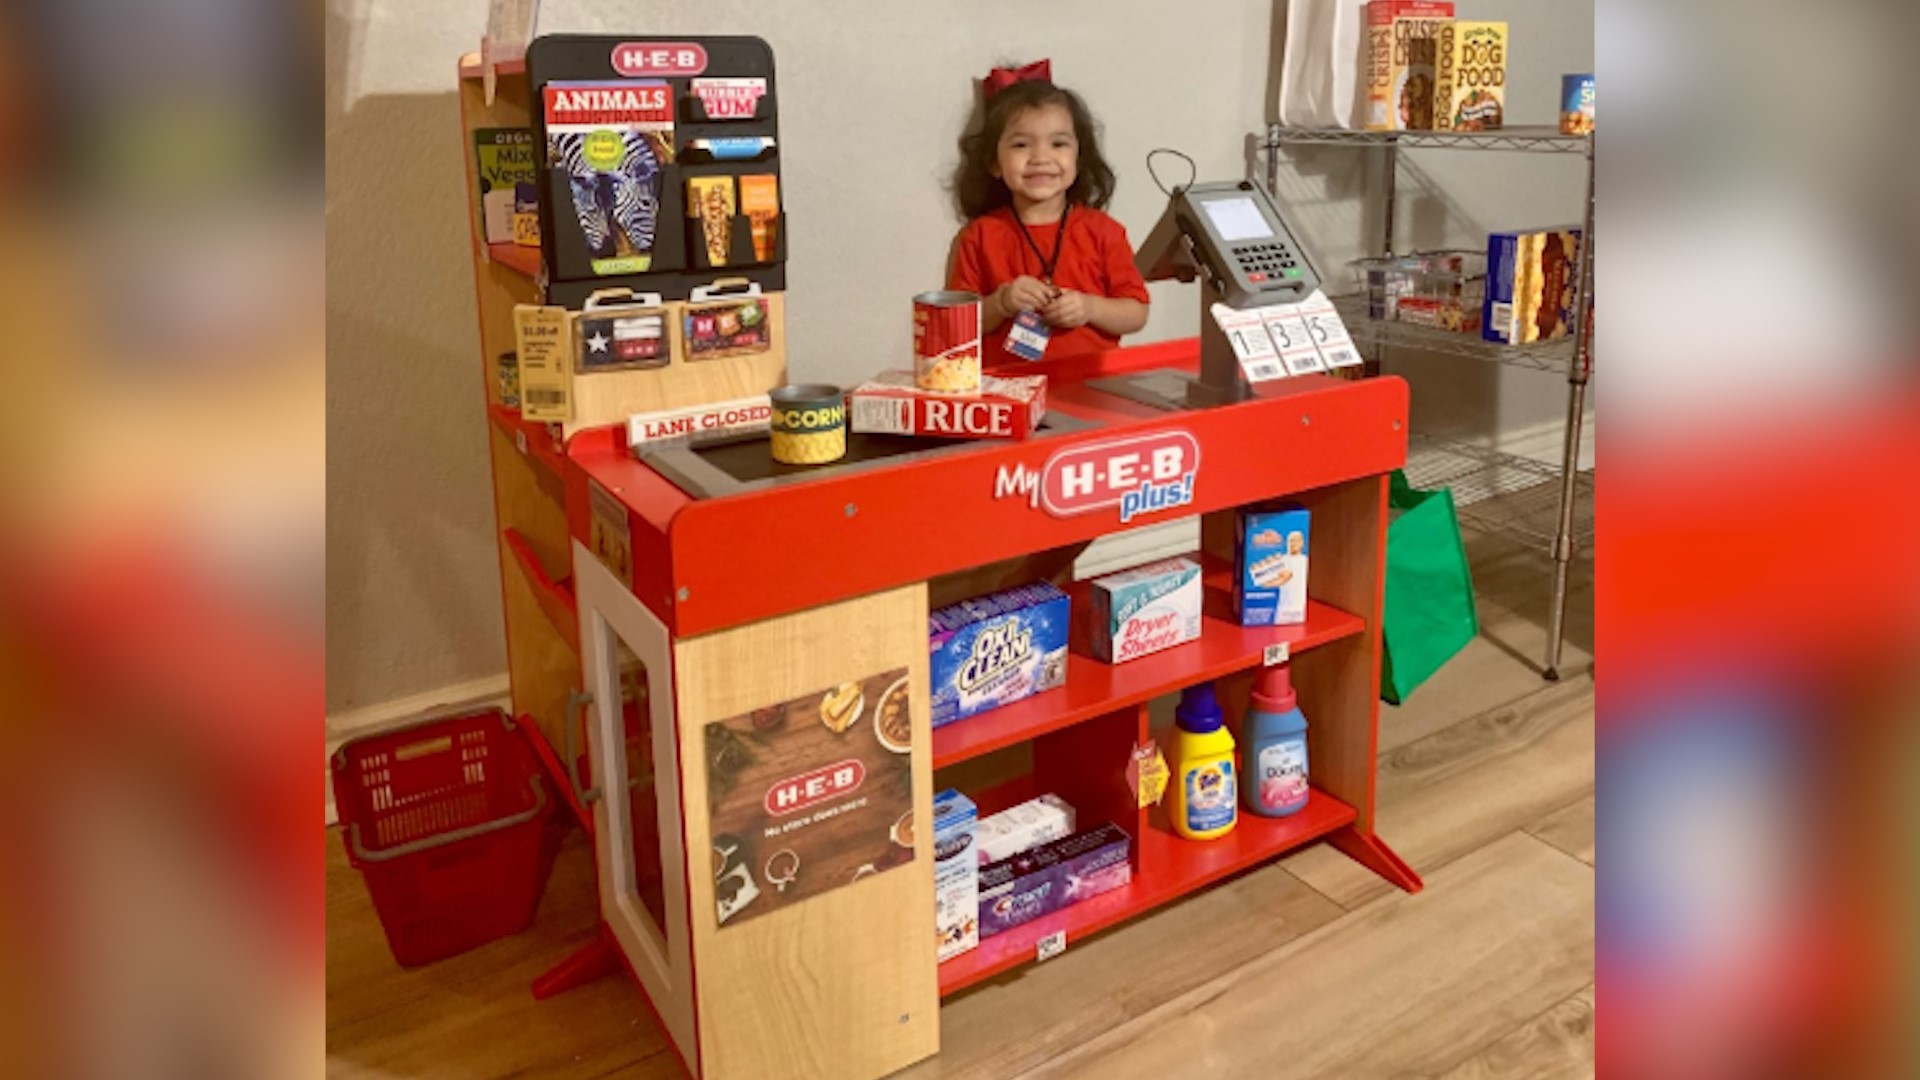 You know the old phrase, "No store does more than my H-E-B"? Well, Lori Plata might just have them beat. Digital journalist Lexi Hazlett shows you this DIY project.